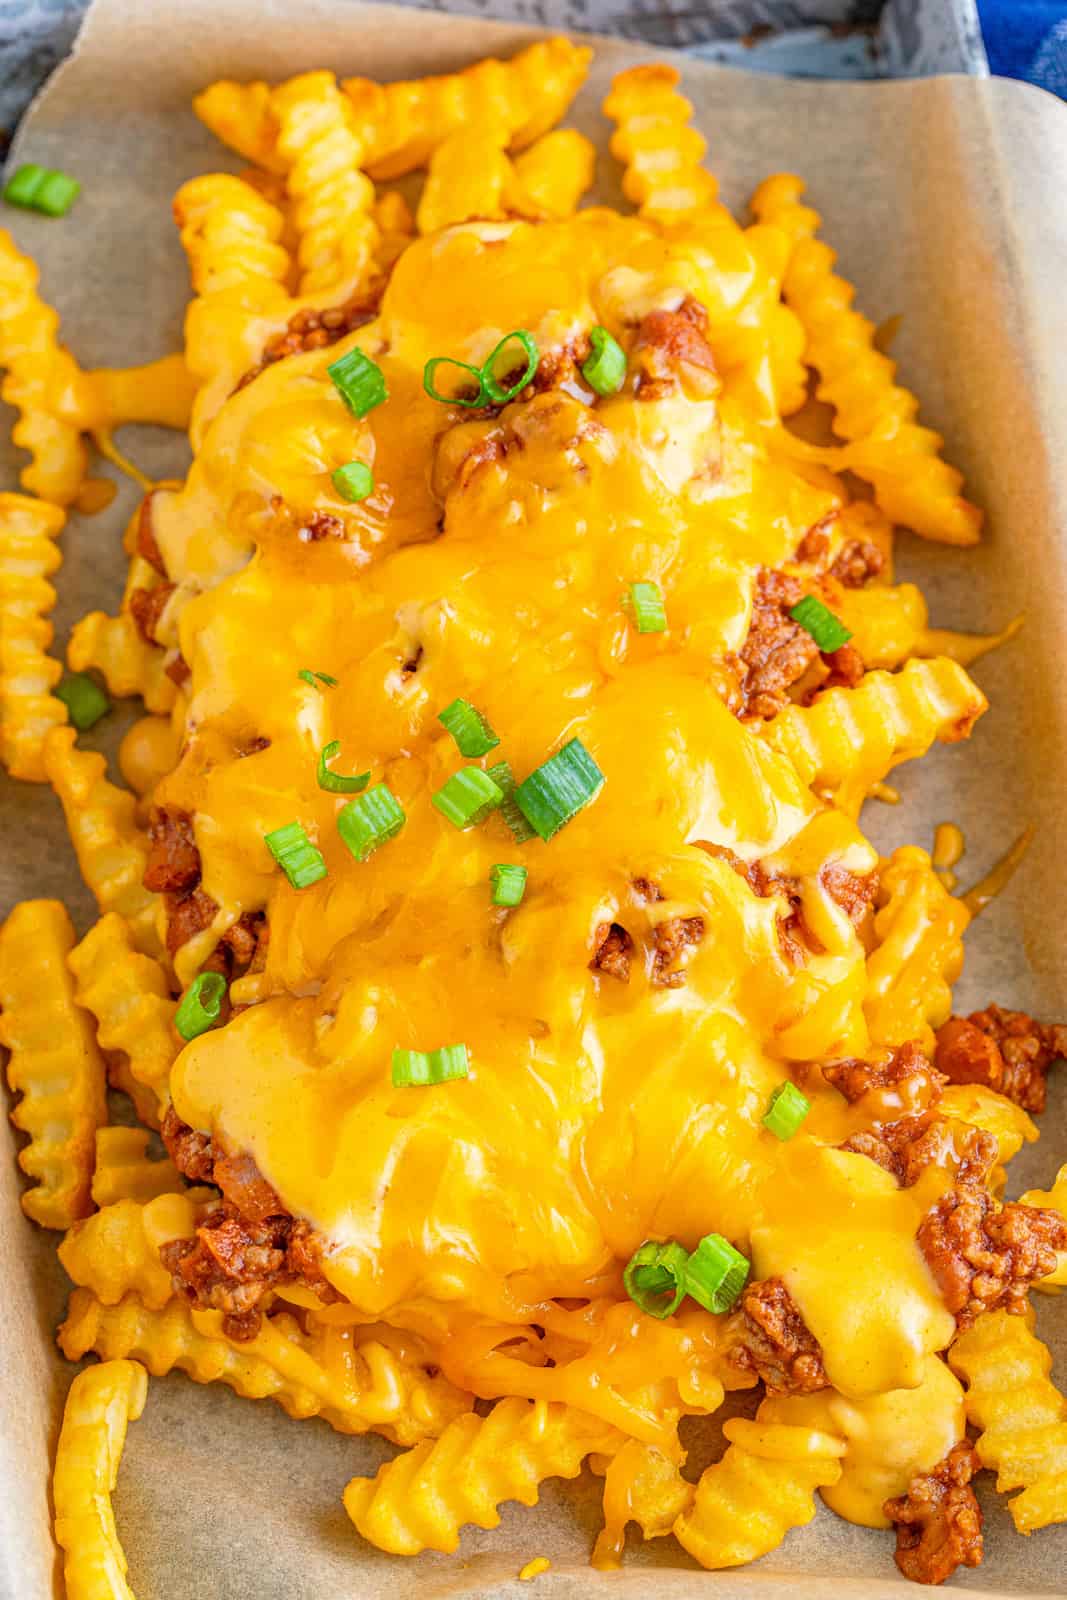 Overhead of Chili Cheese Fries on parchment paper.